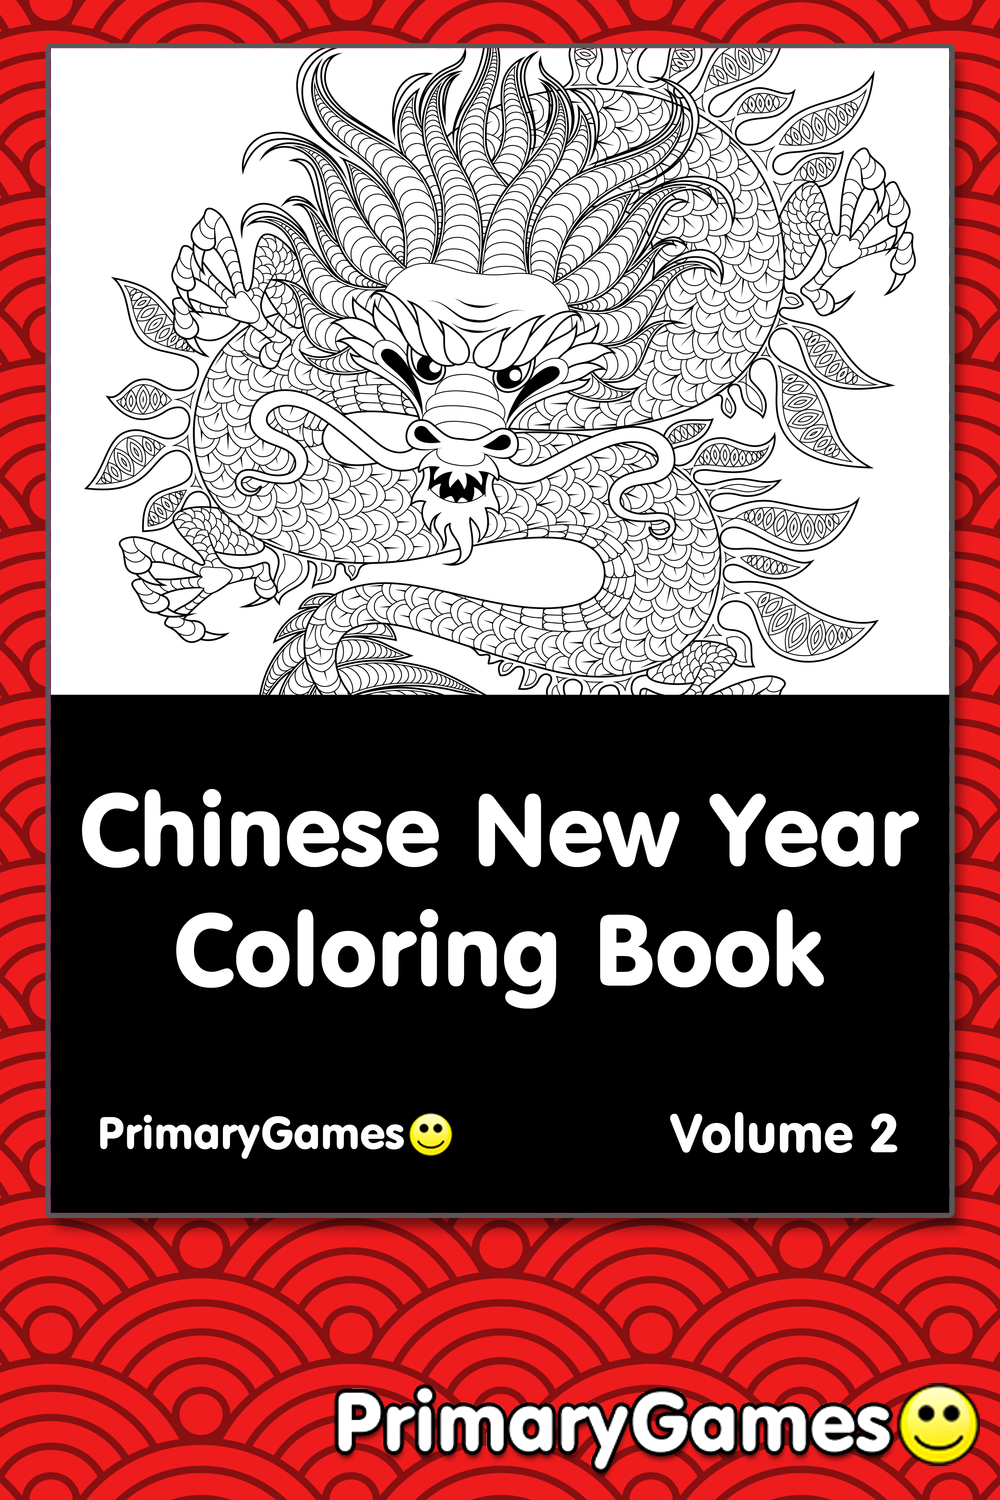 Chinese New Year Coloring eBook Volume 2 • FREE Printable ...